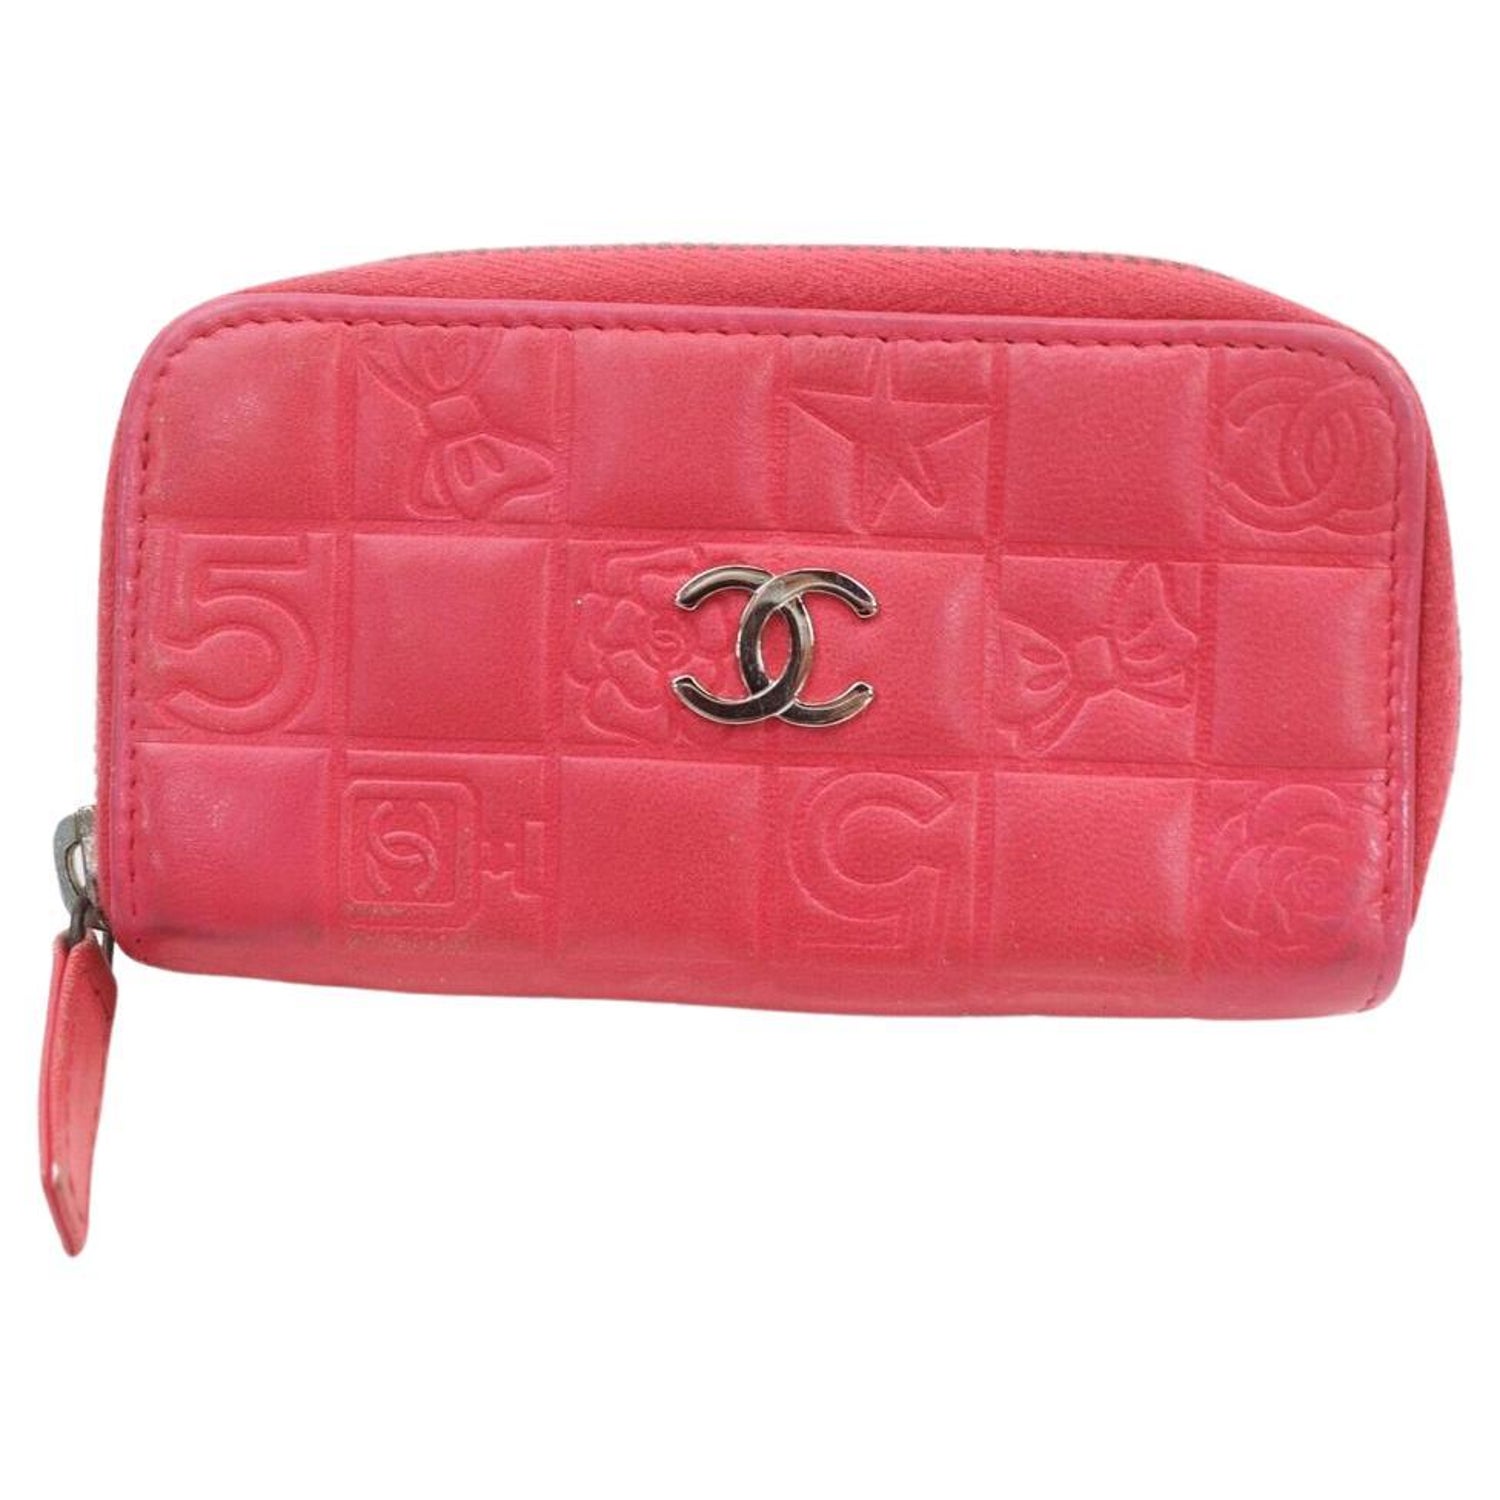 Chanel Key Pouch - 3 For Sale on 1stDibs | chanel pouch